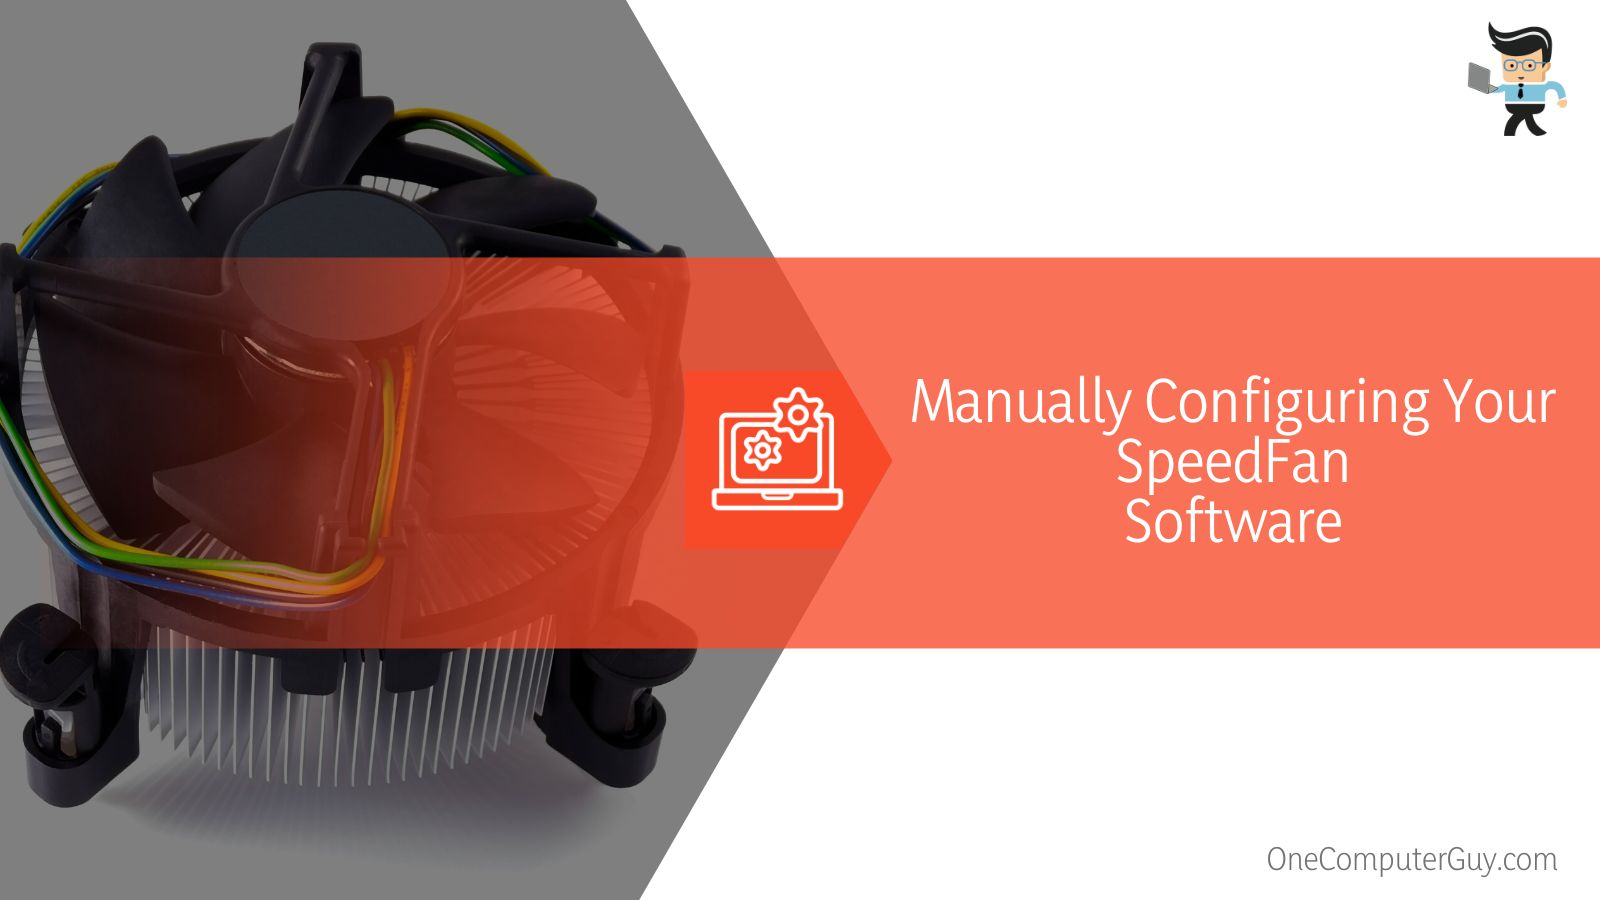 Manually Configuring Your SpeedFan Software